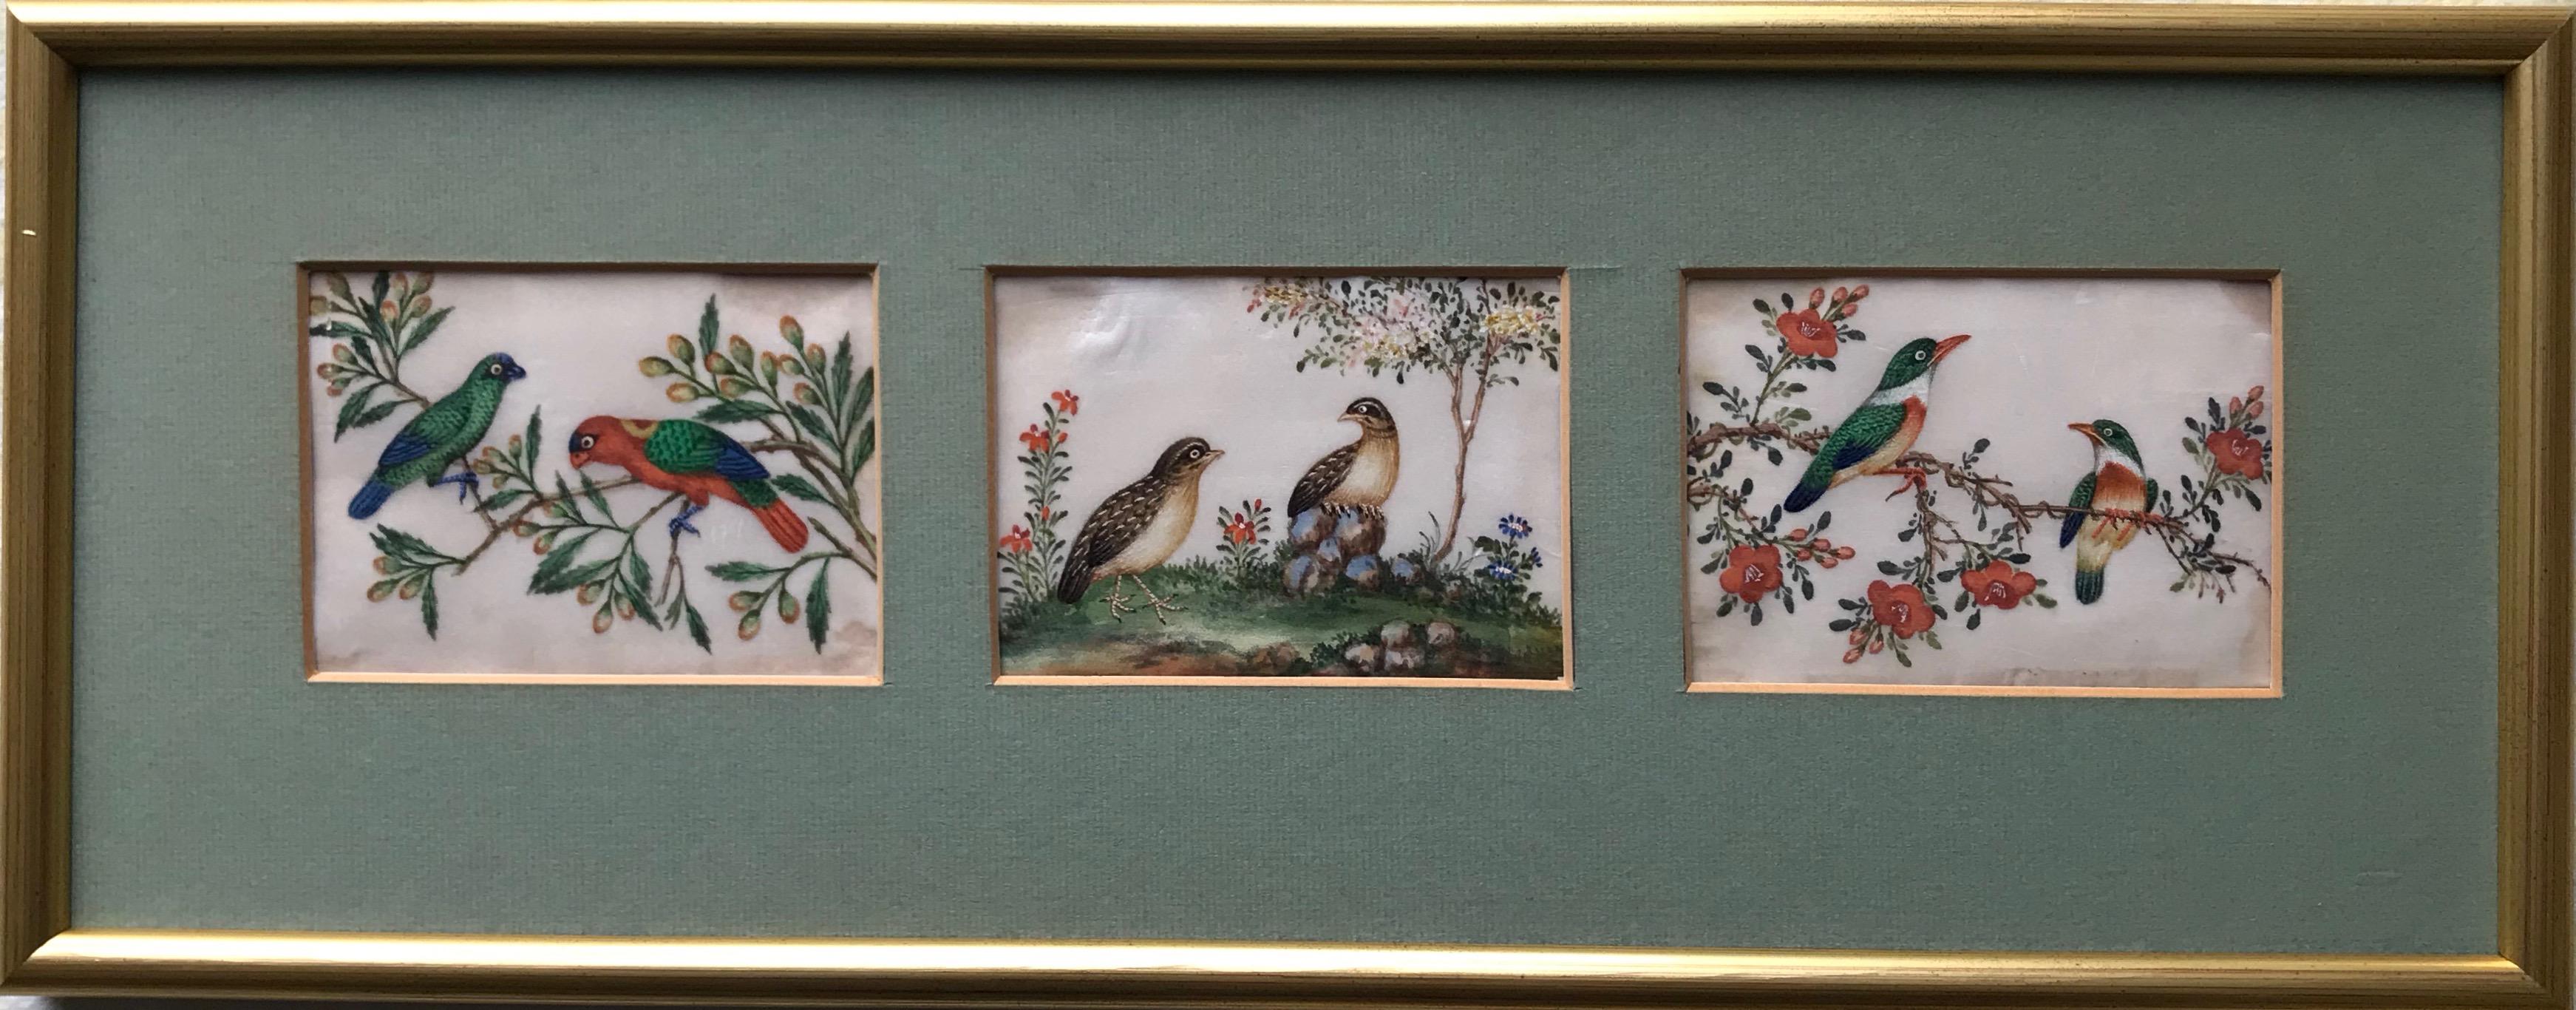 Three 19th Century Chinese Export Rice Pith Paper watercolors of birds - Art by 19th Century Chinese school